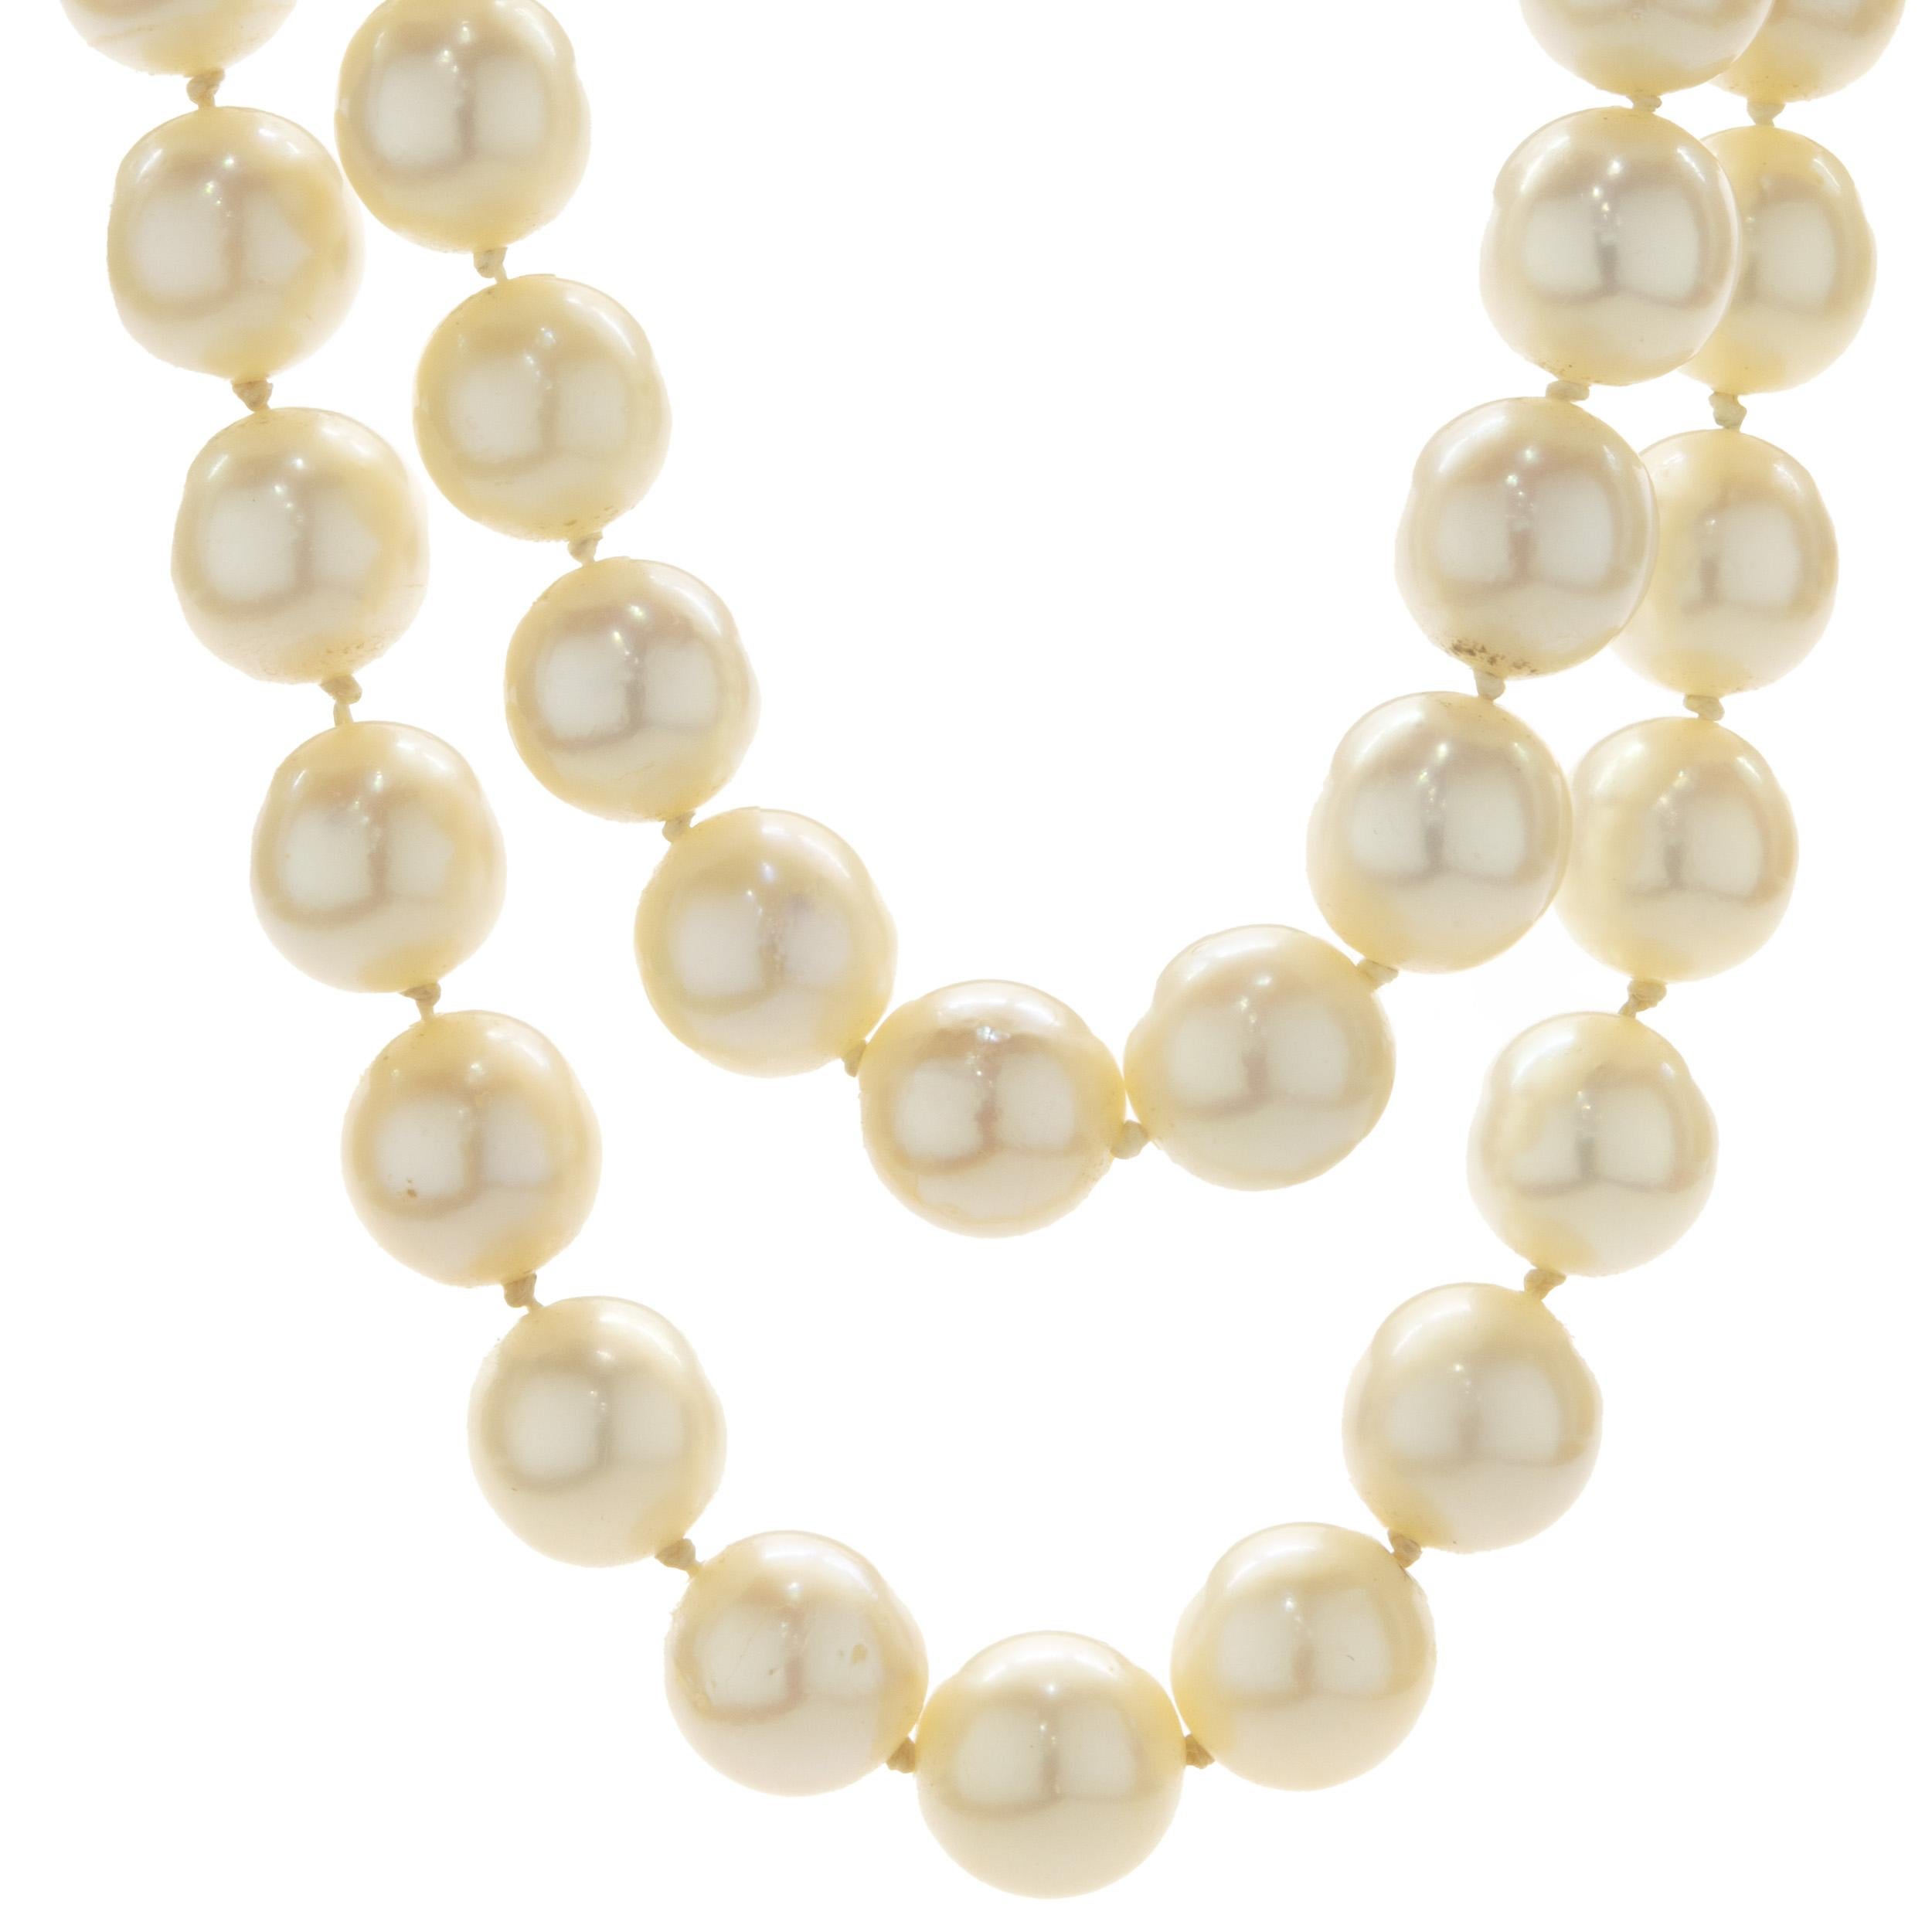 Designer: custom
Material: freshwater pearls 
Weight: 82.63 grams
Dimensions: necklace measures 31-inches